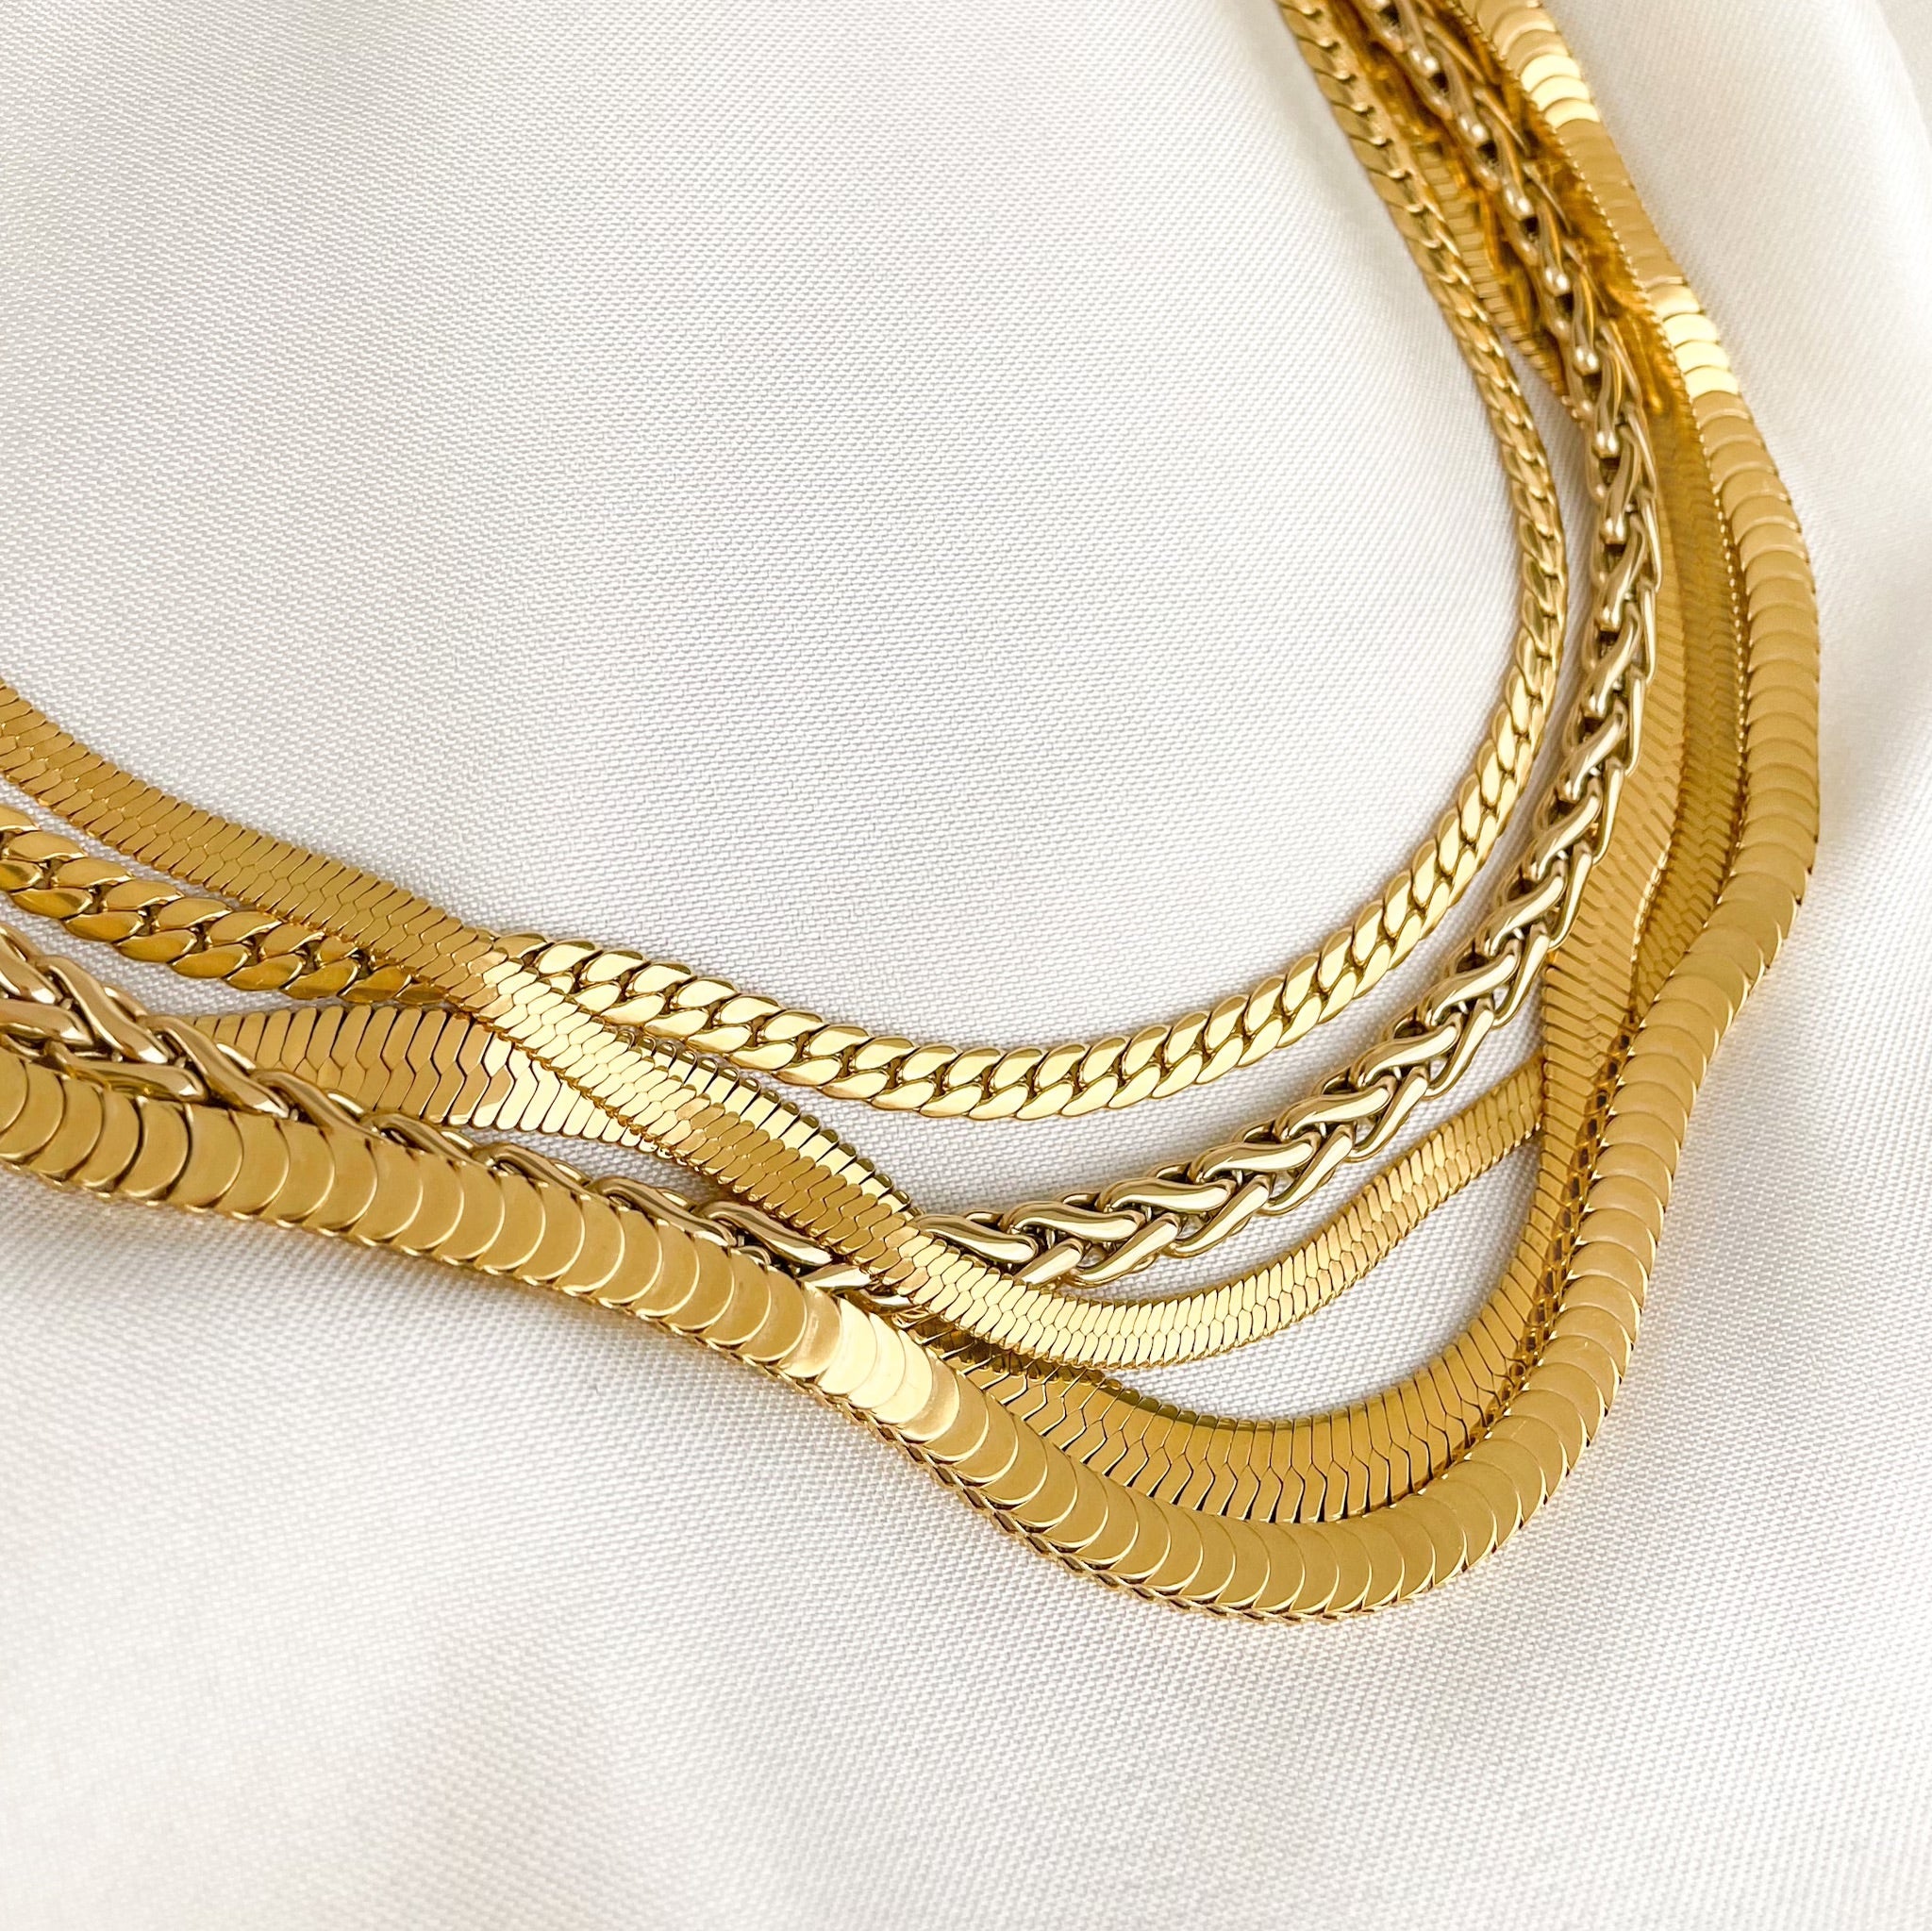 Cuban Curb Link Collar Necklace in 18K Gold Plated Sterling Silver. 